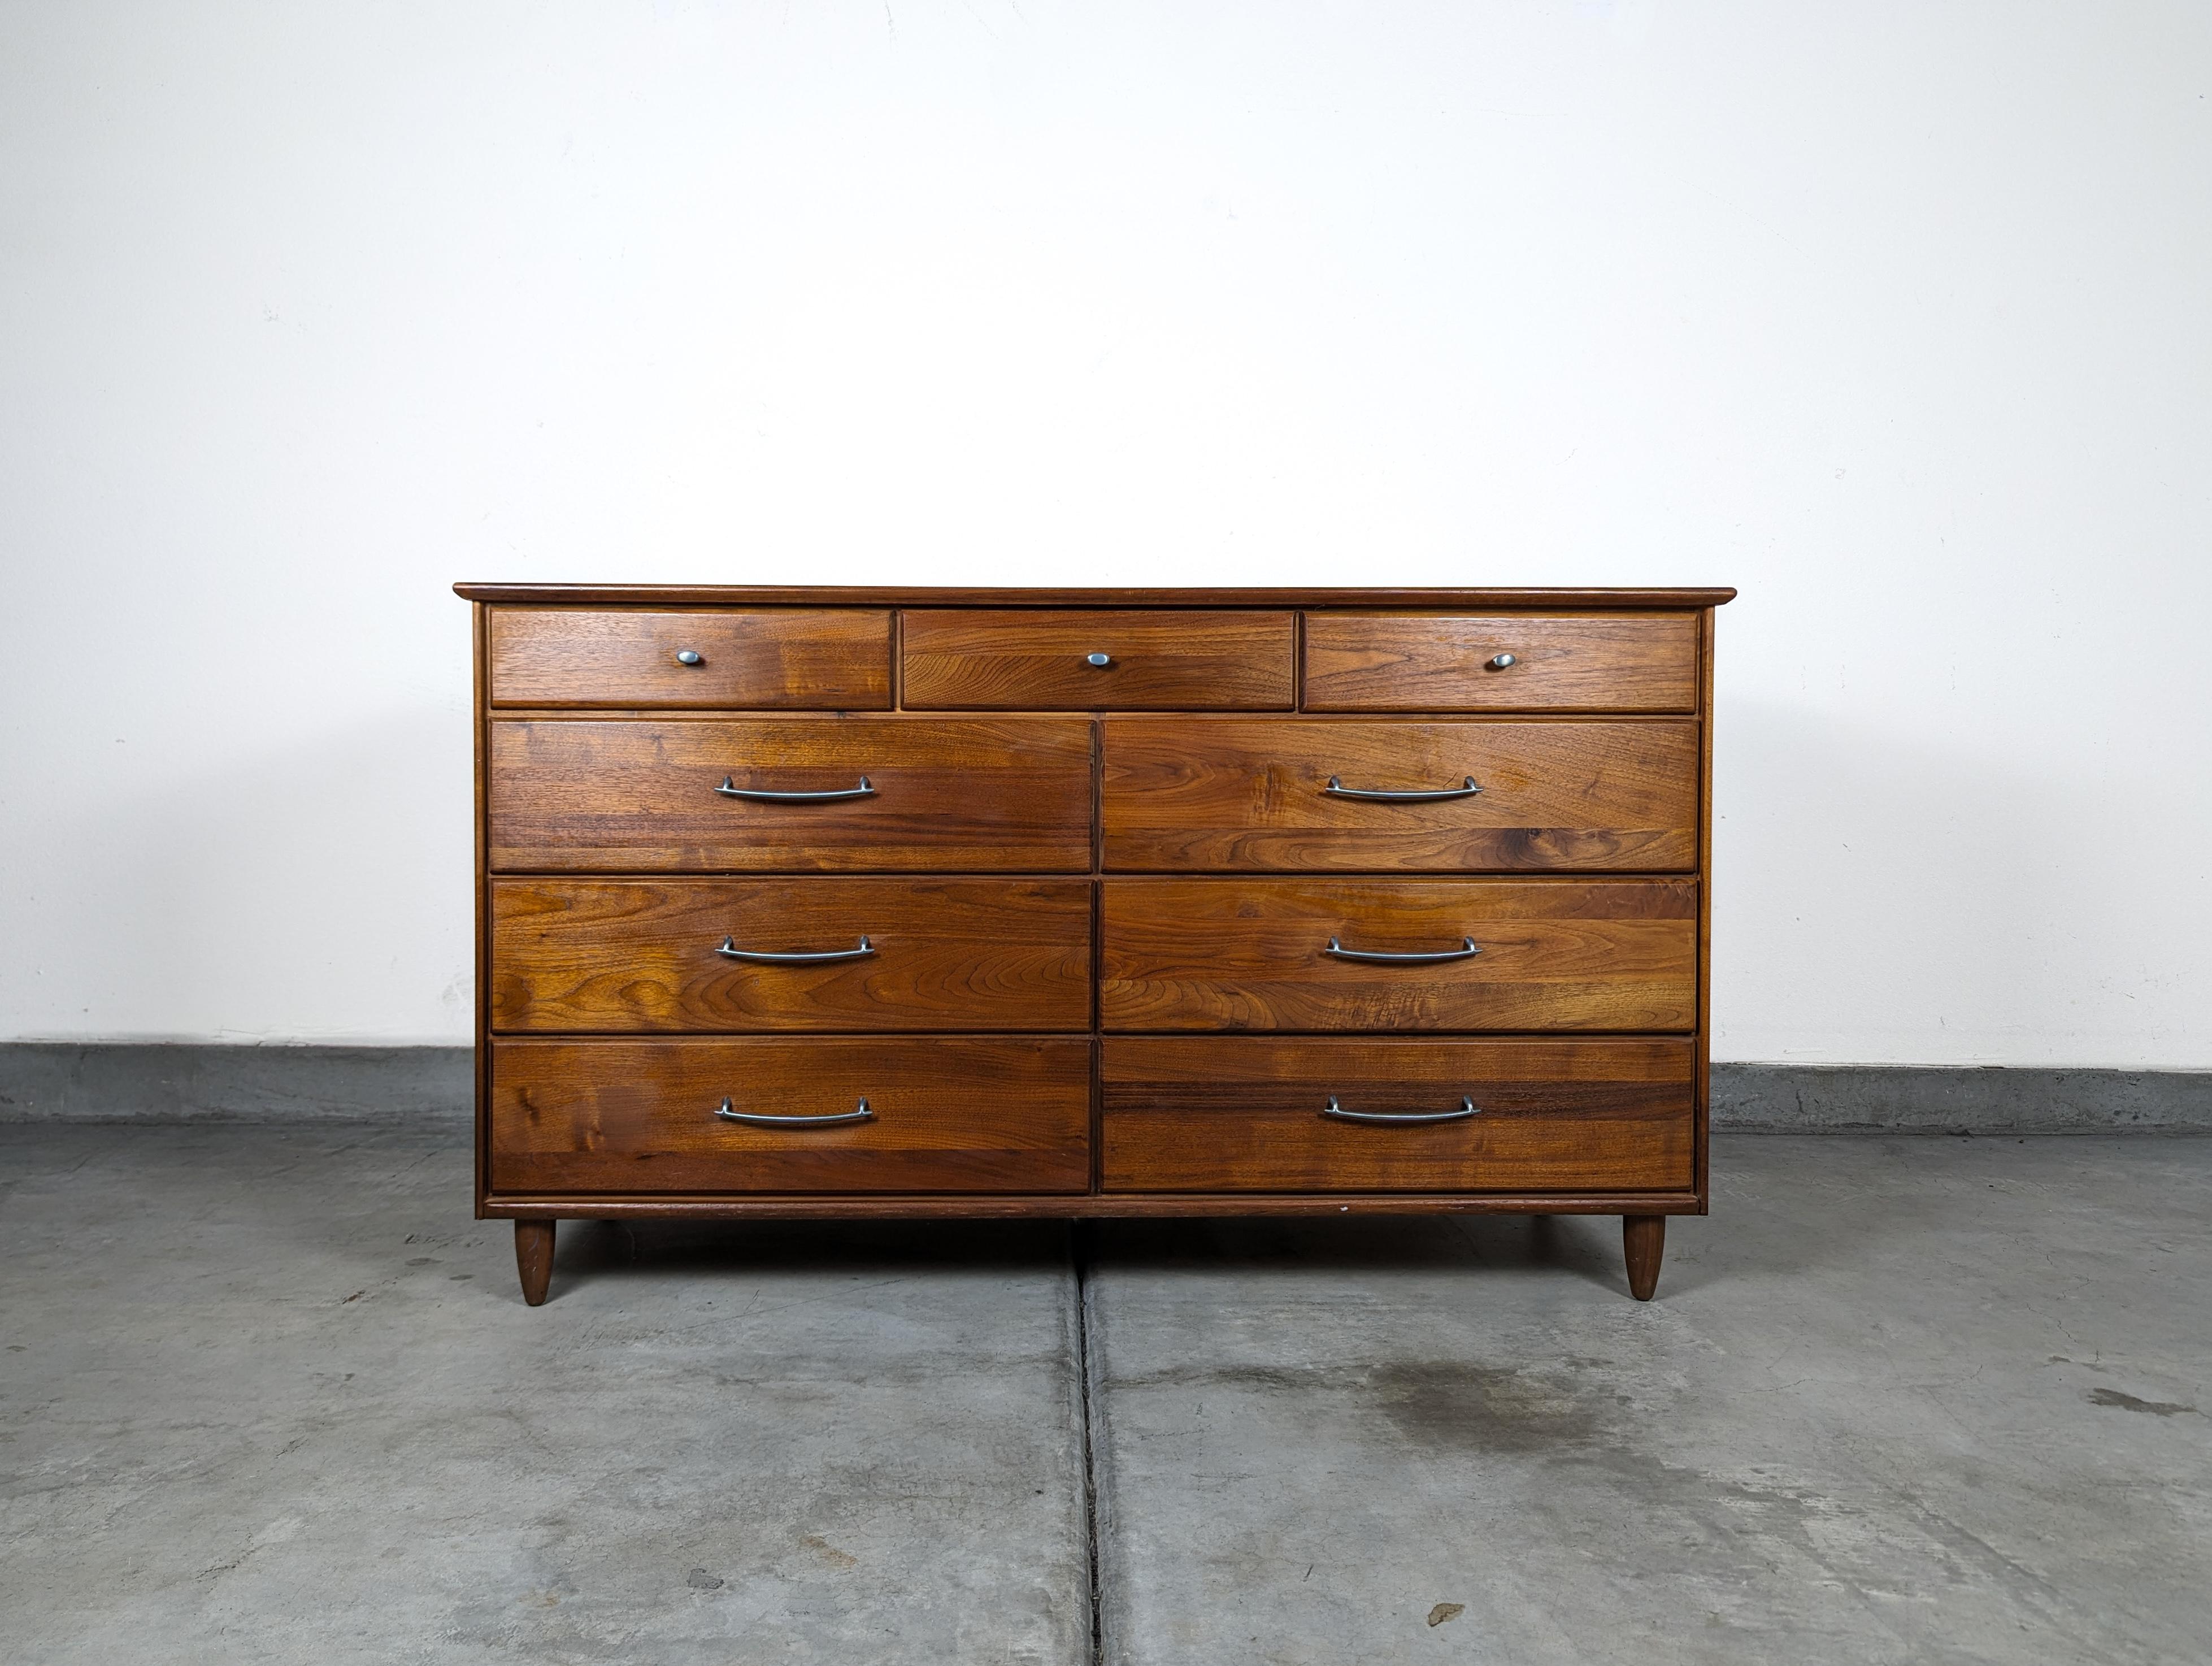 Discover the epitome of mid-century design with this exquisite vintage walnut dresser by Ace-Hi, crafted in the vibrant 1960s. This dresser represents a true testament to the era's dedication to quality and style, with its solid walnut construction